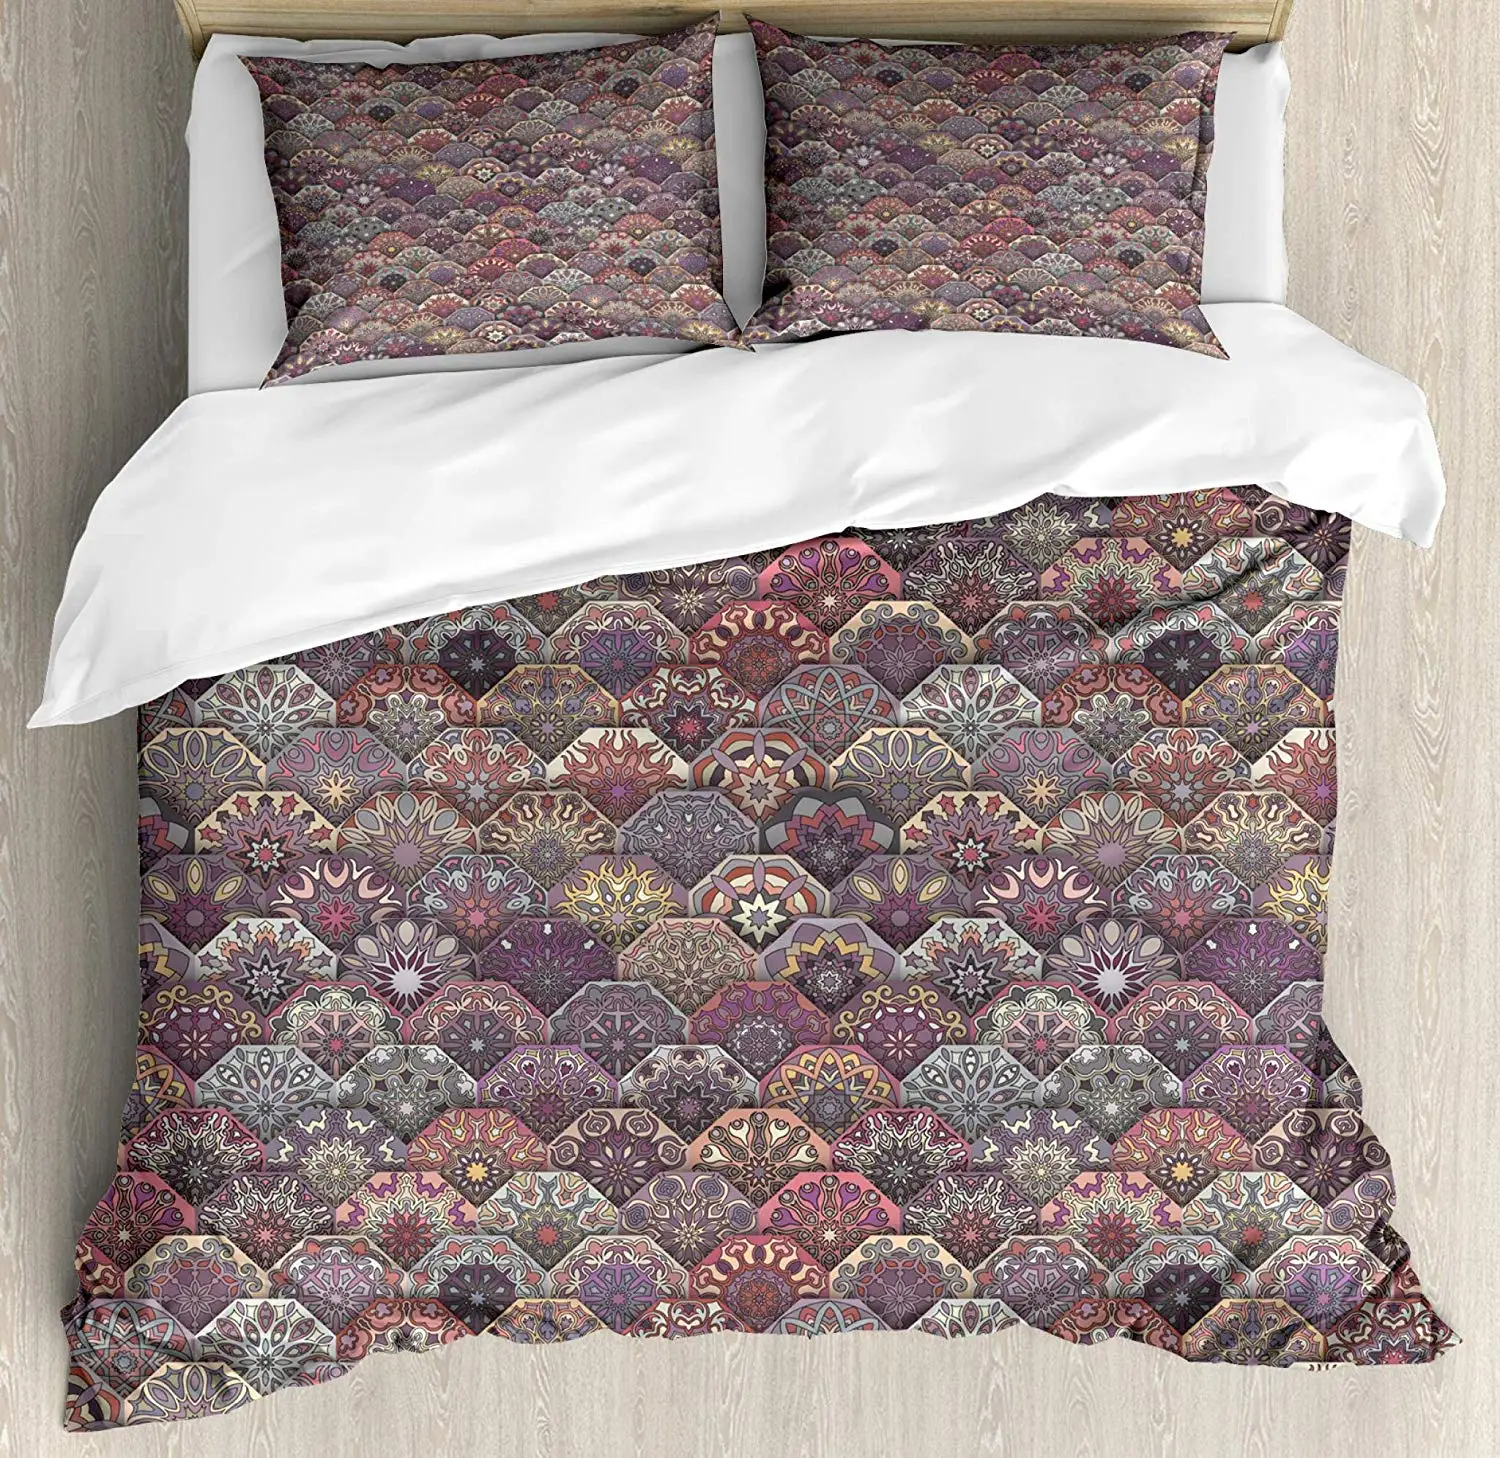 Moroccan Duvet Cover Set Colorful Vintage Floral Mandala Pastel Hexagonal Overlapping Design Mexican Ornate 3 Piece Bedding | Дом и сад